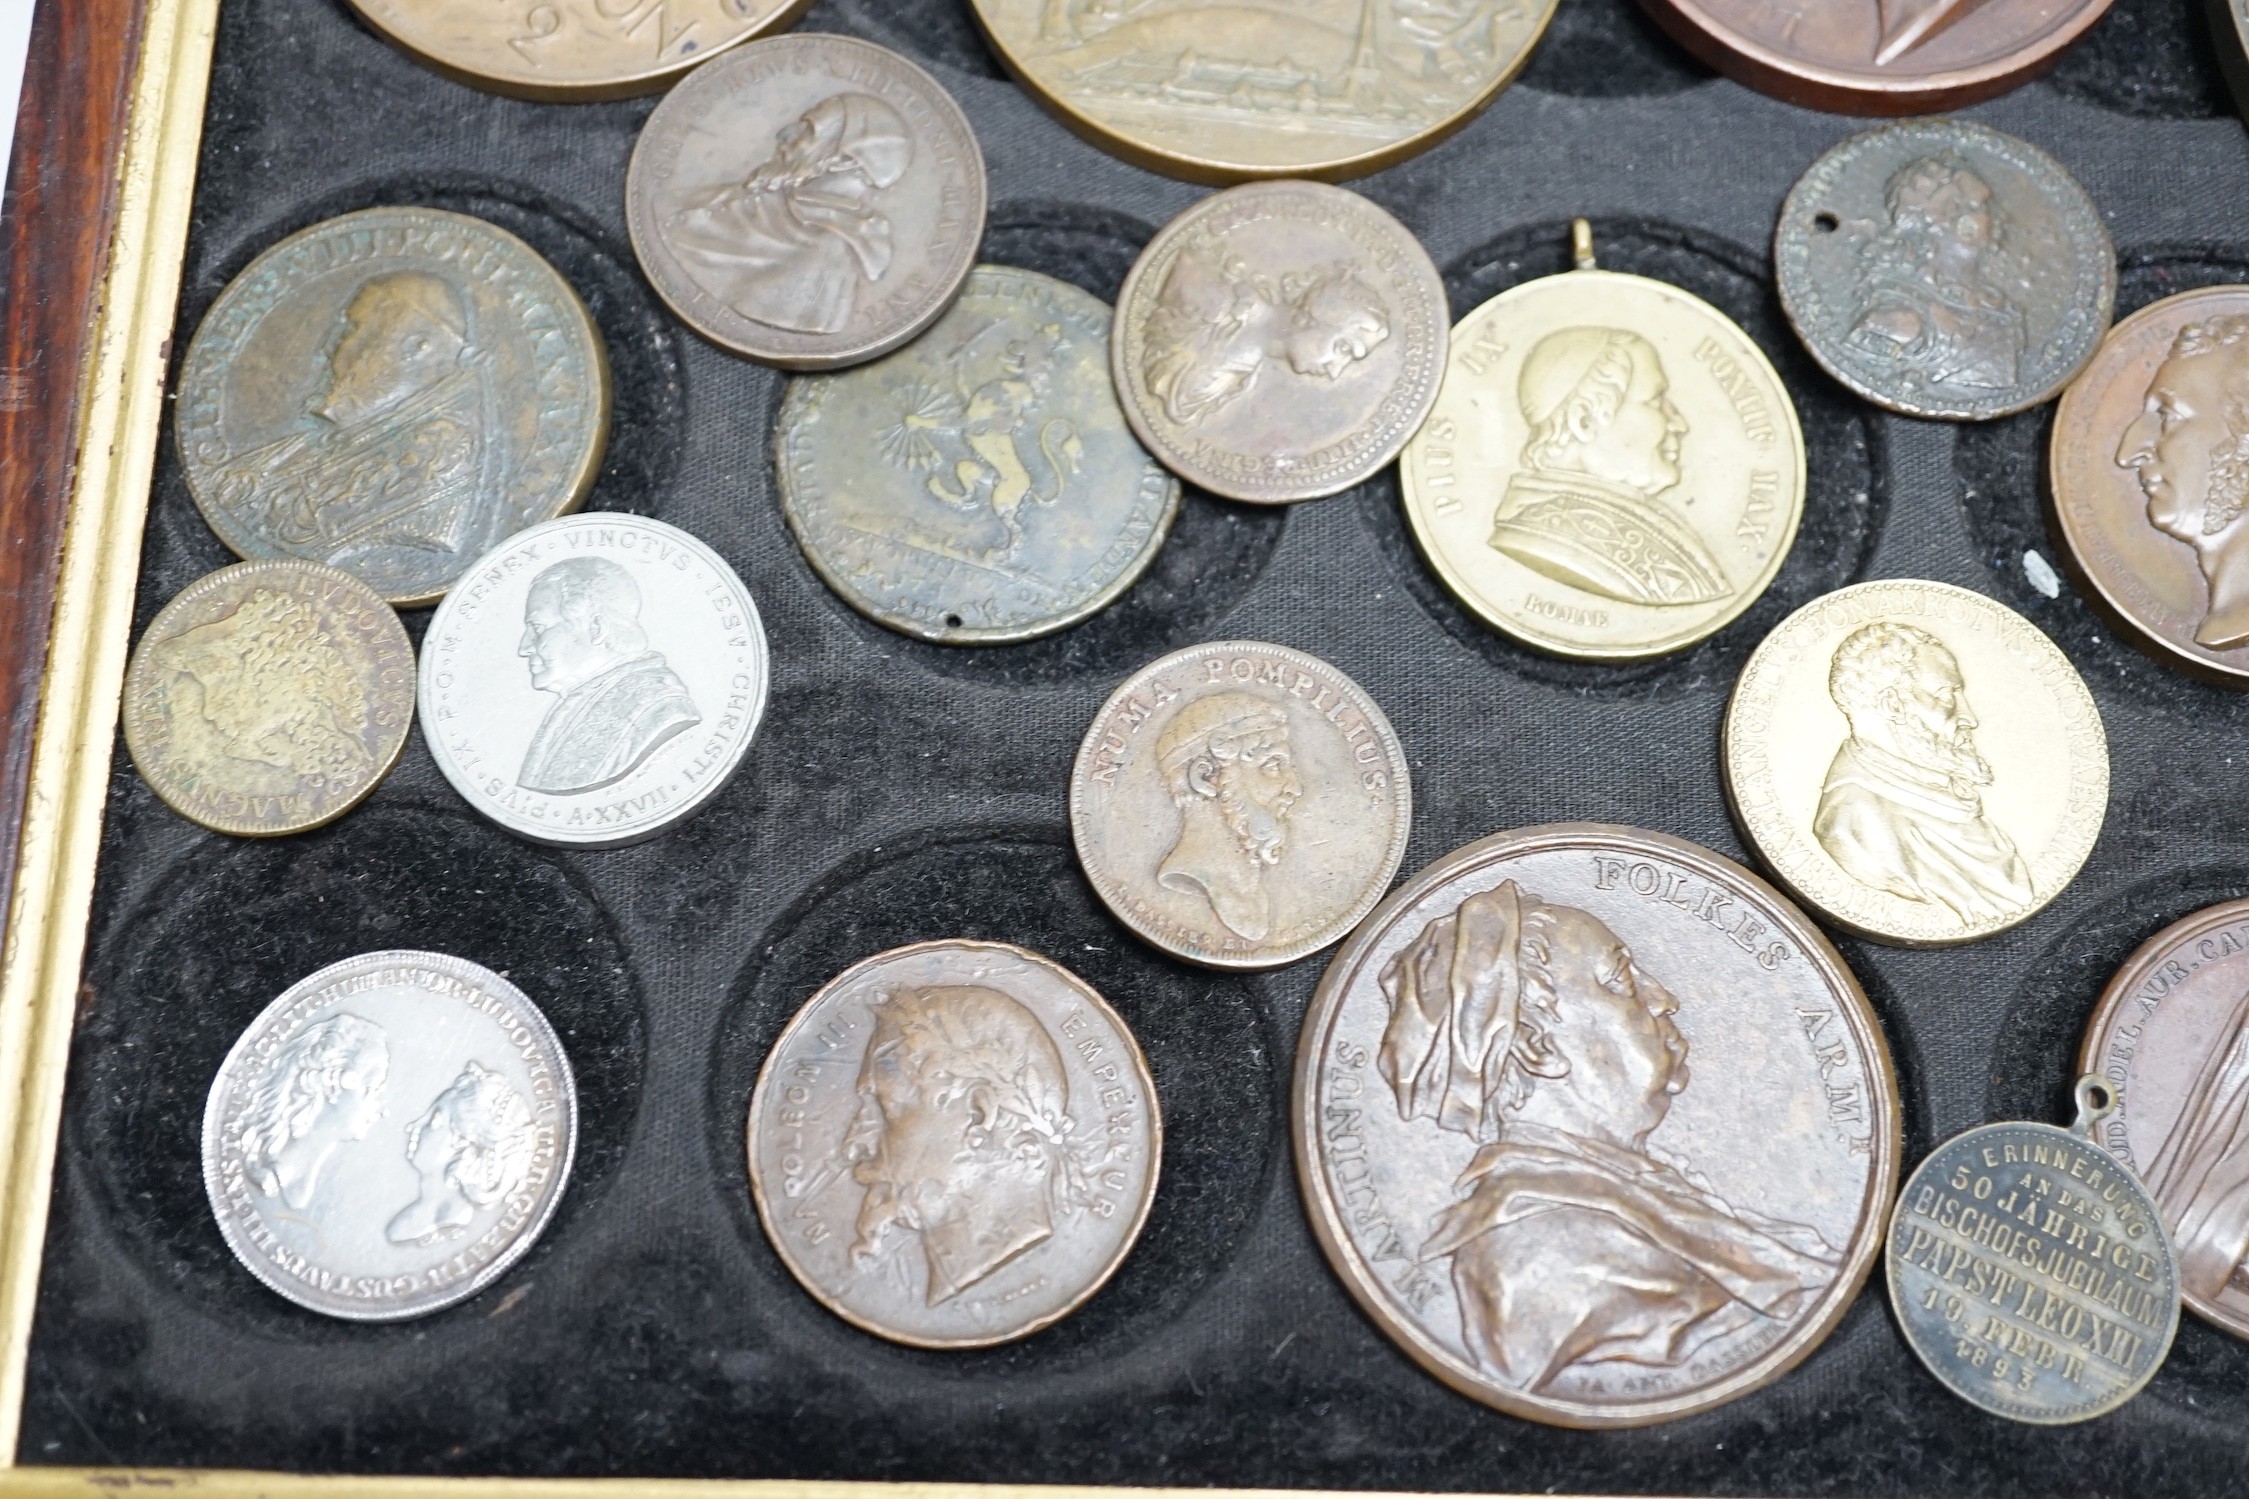 Foreign commemorative medals, 18th to 20th century –